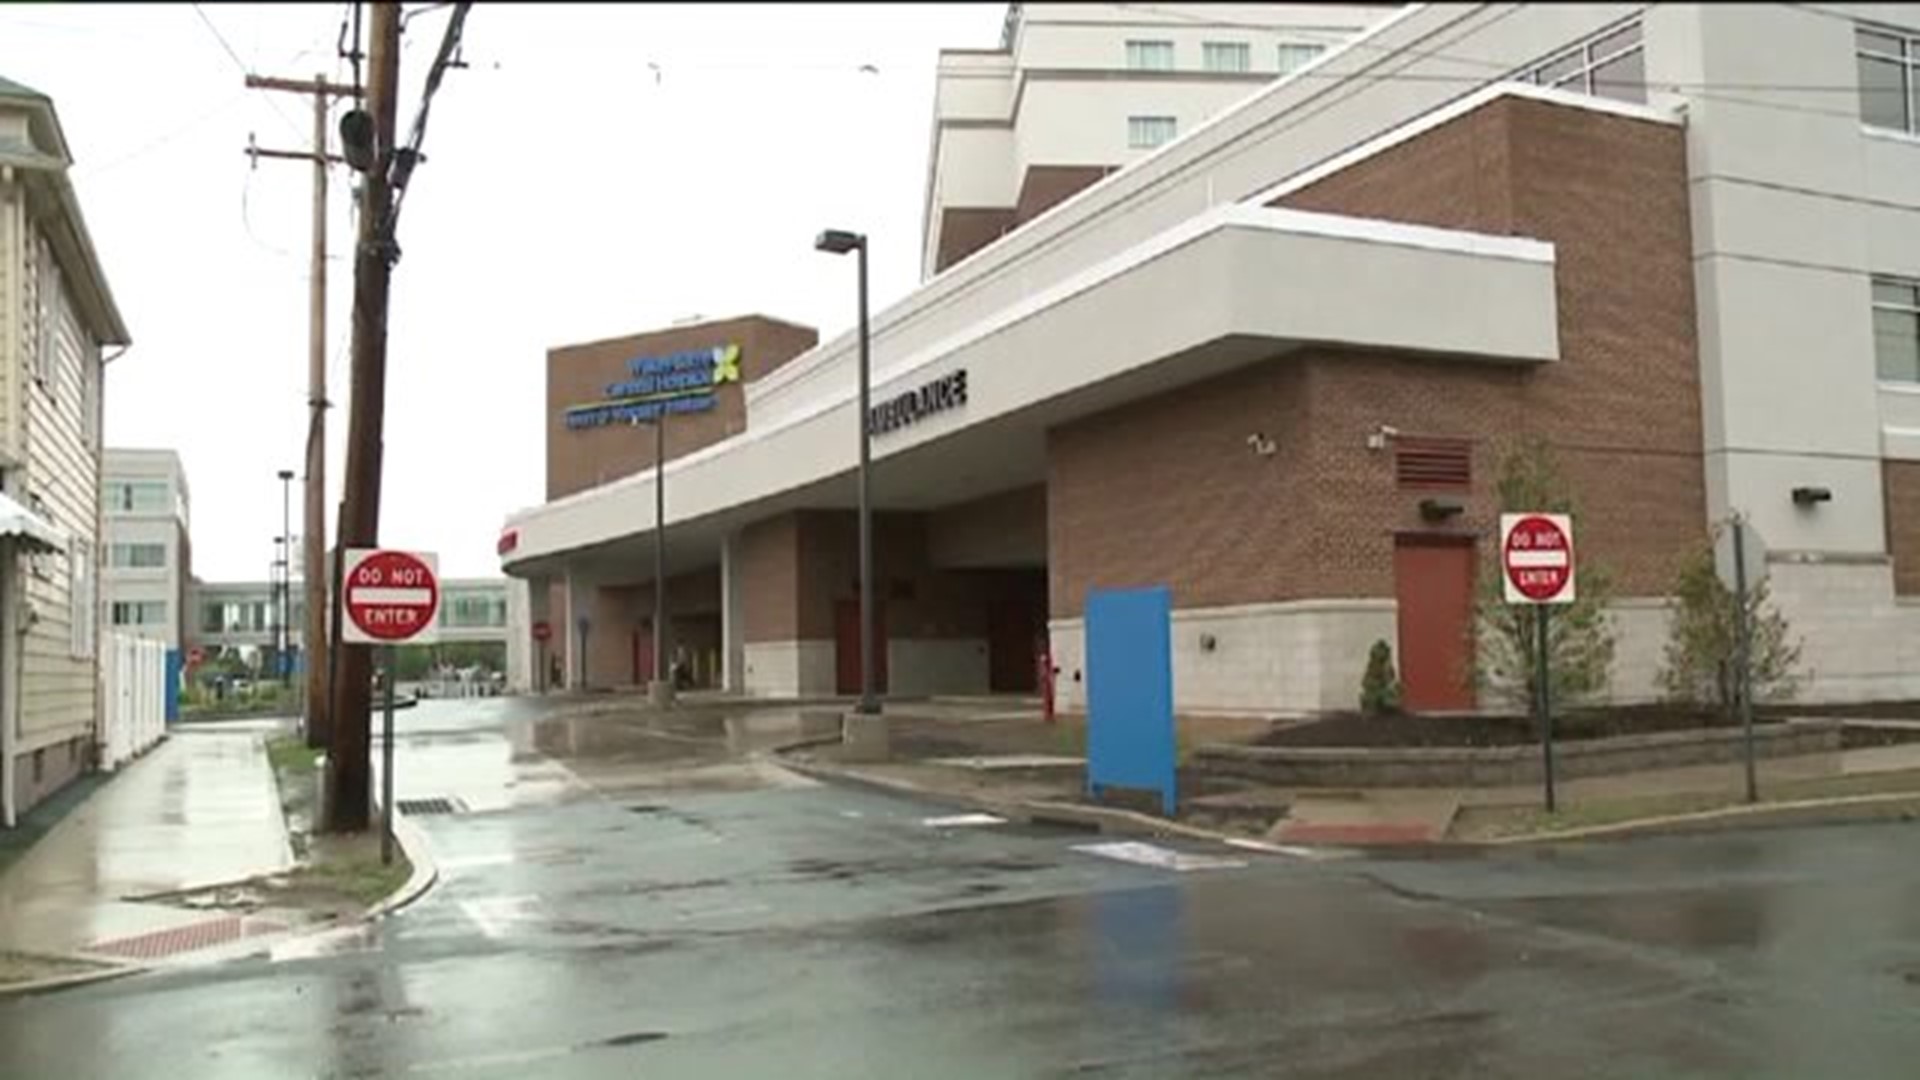 Shooting Victim Dropped off at Wilkes-Barre Hospital